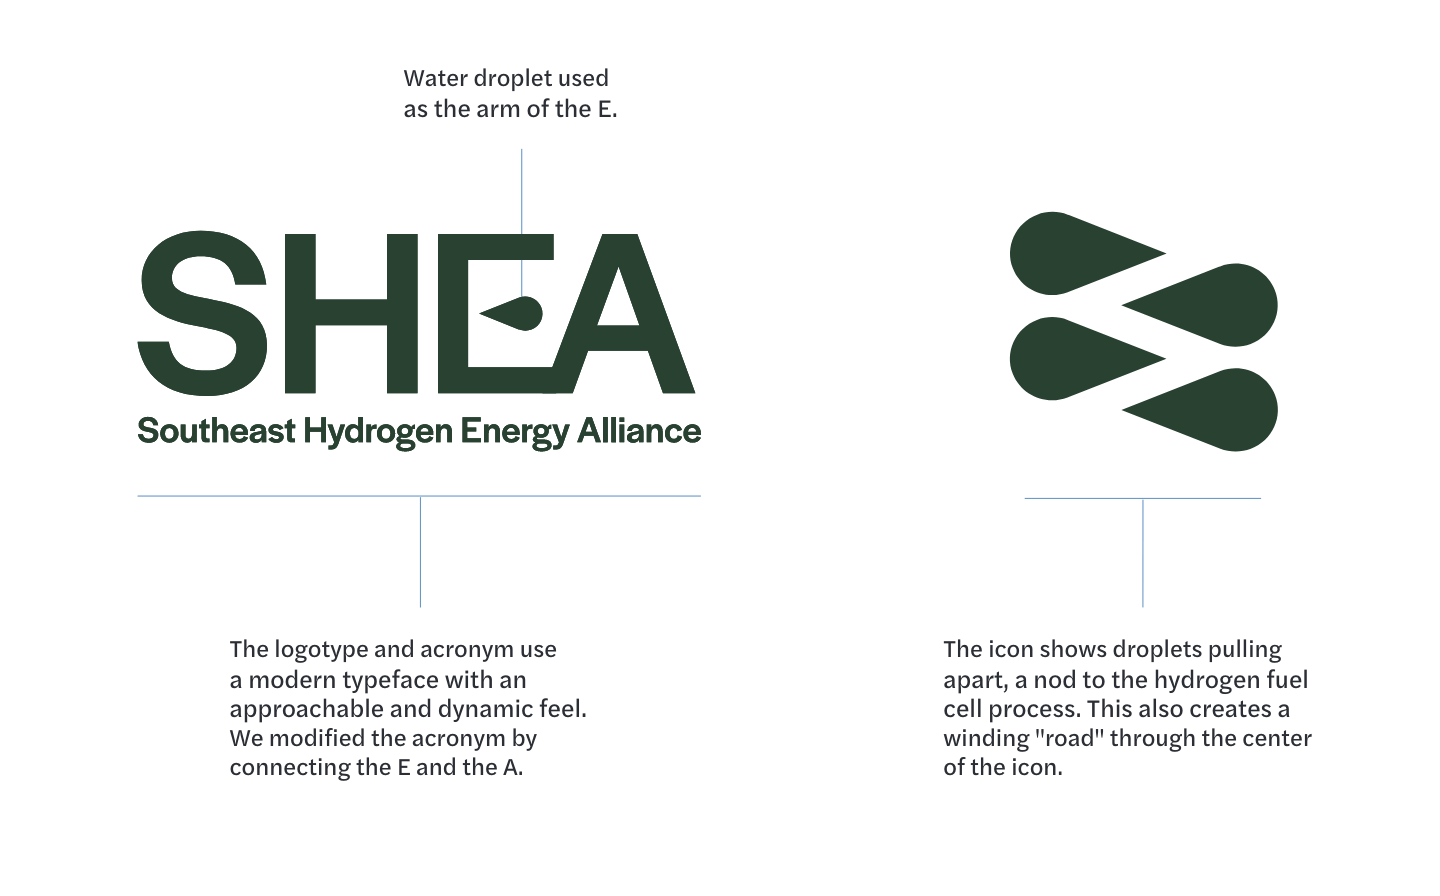 anatomy of the logo explained: "the logotype and acronym use a modern typeface with an approachable and dynamic feel. We modified the acronym by connecting the E and the A. A water droplet is used as the arm of the E. The icon shows droplets pulling apart, a nod to the hydrogen fuel cell process. This also creates a winding road through the center of the icon."